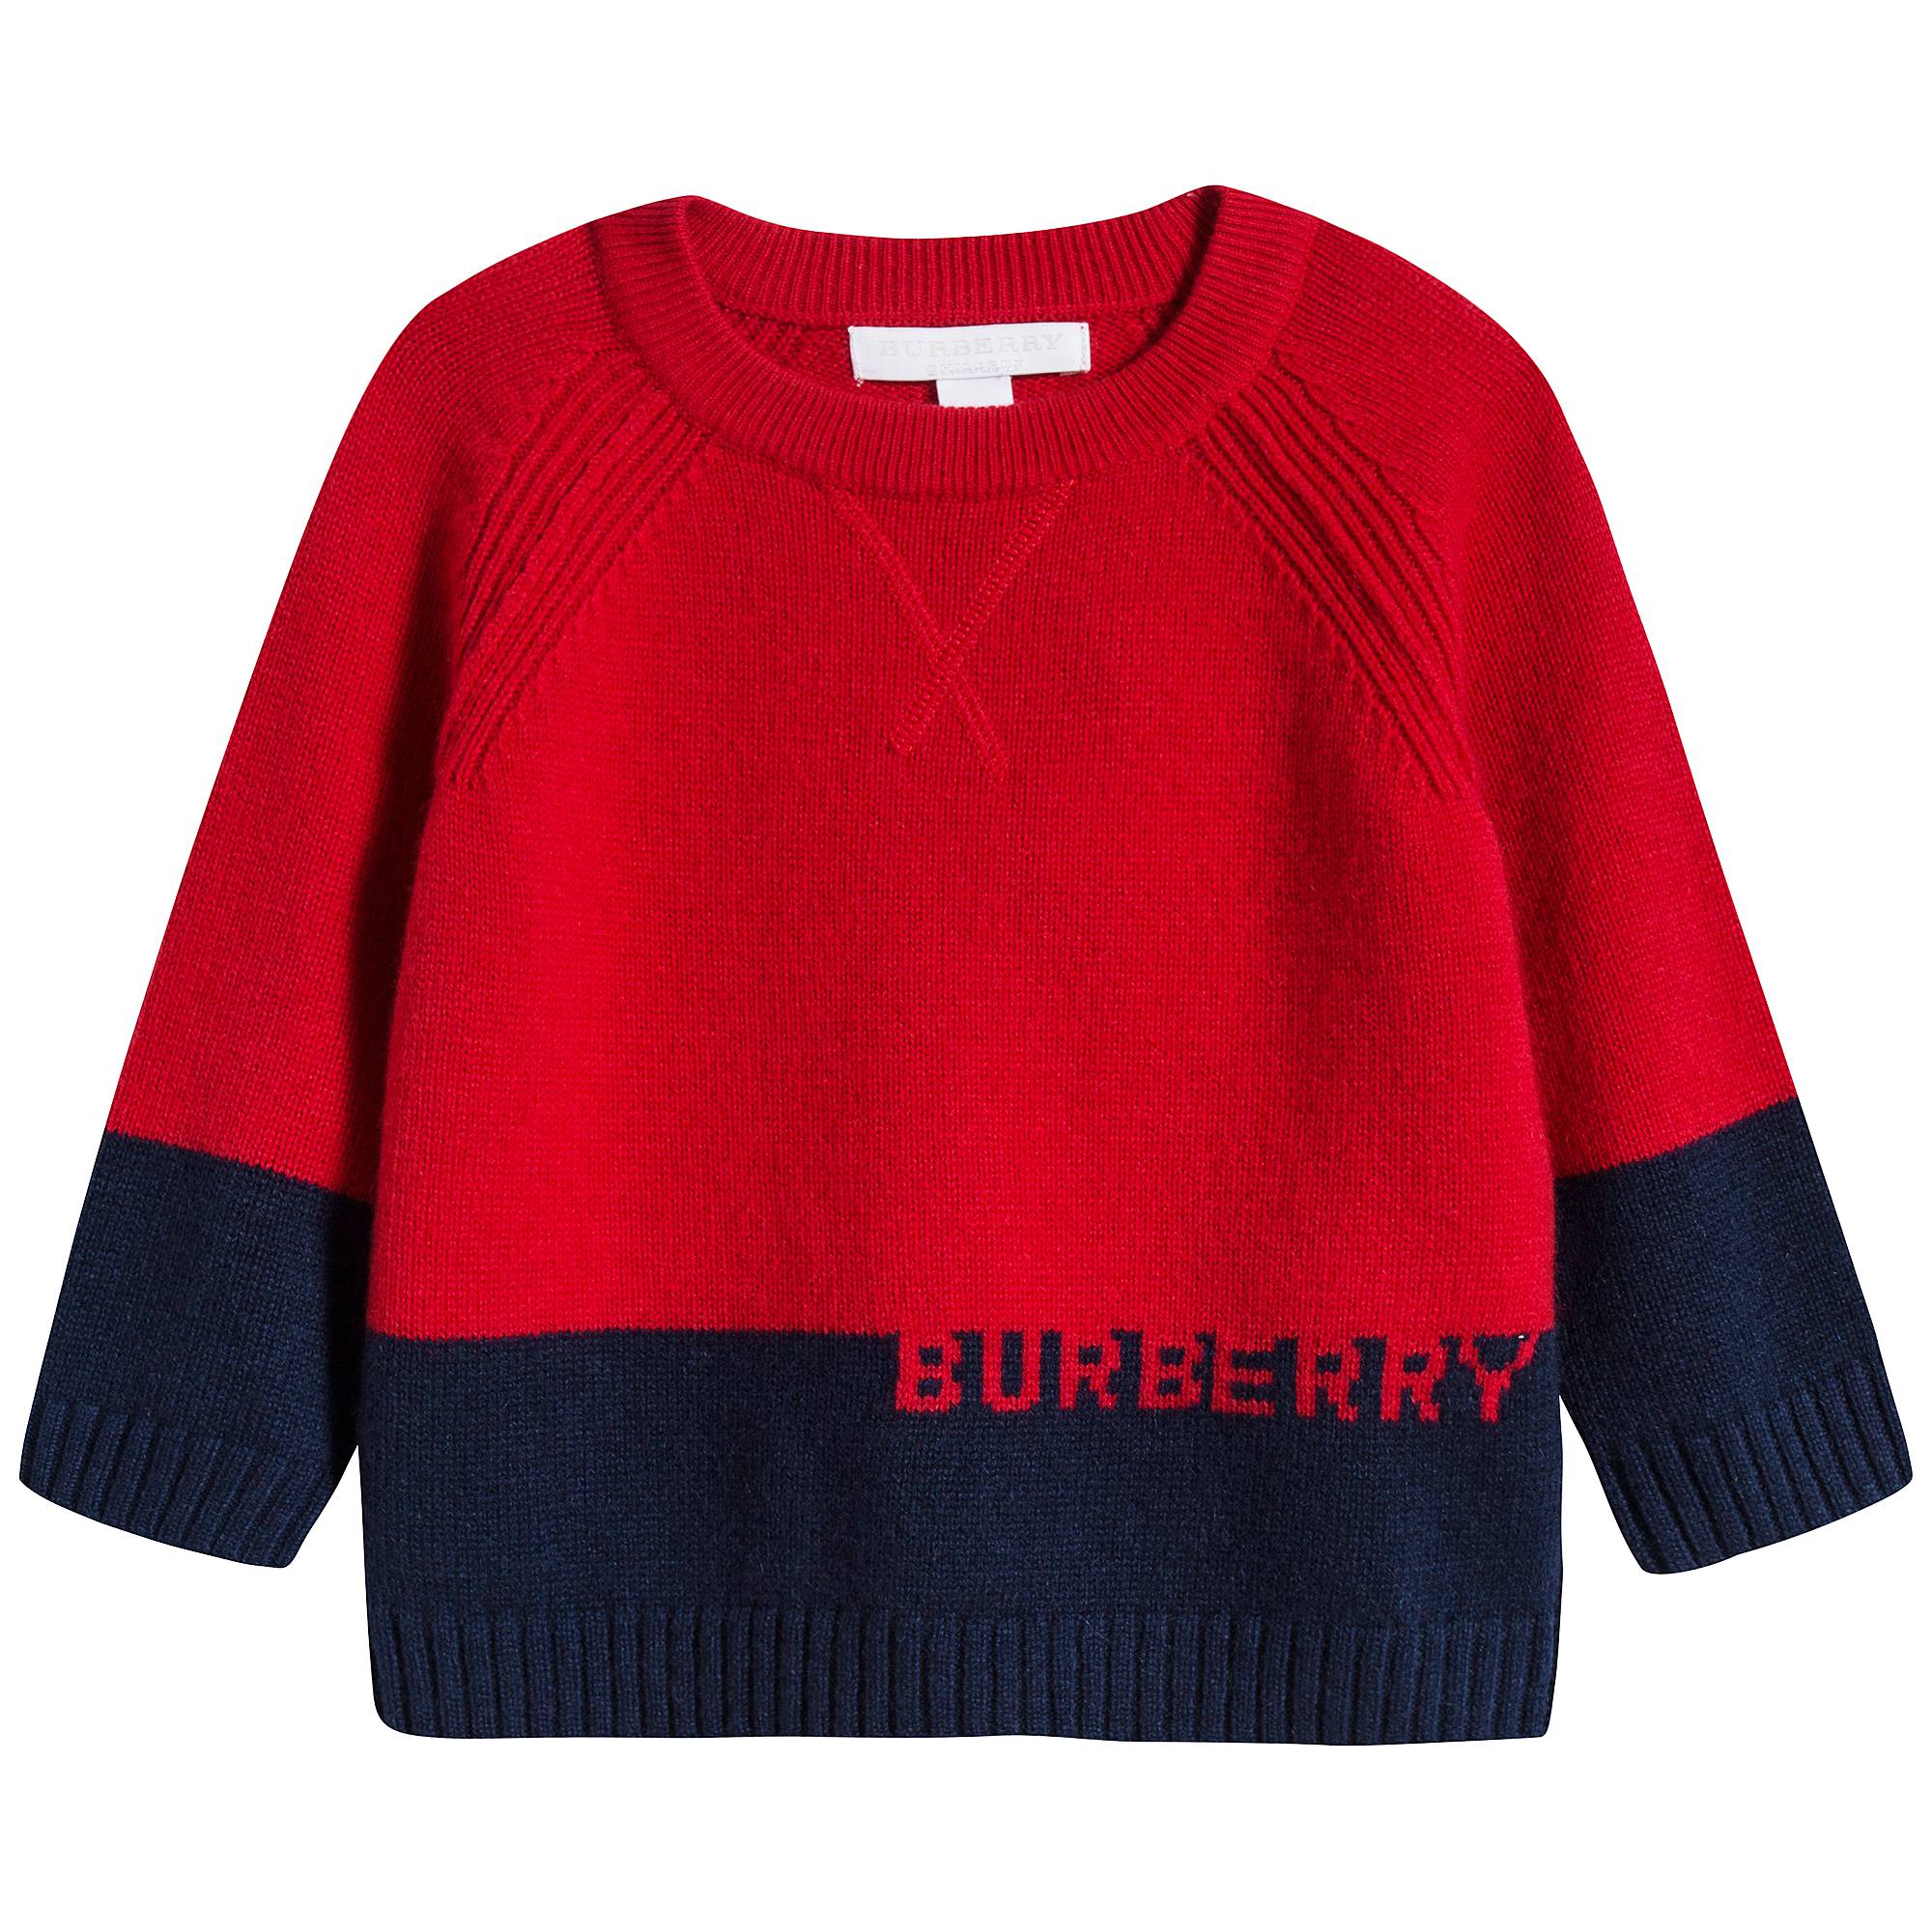 Baby Boys Bright Red Cashmere Sweater